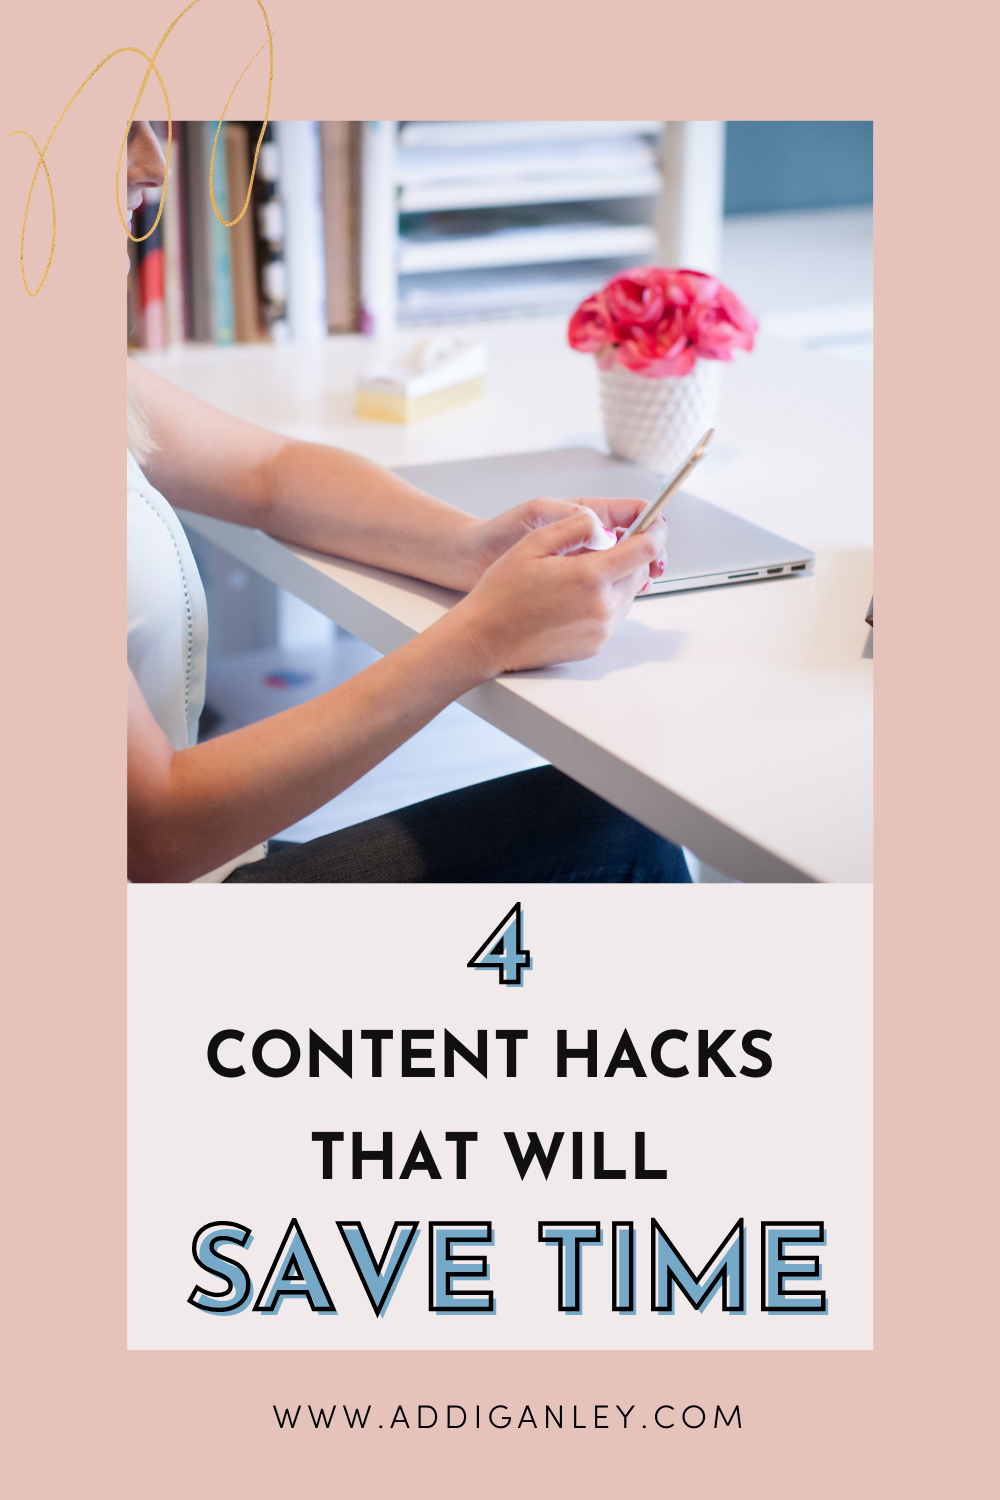 Time%20saving%20content%20hacks%20for%20bloggers%20(1)